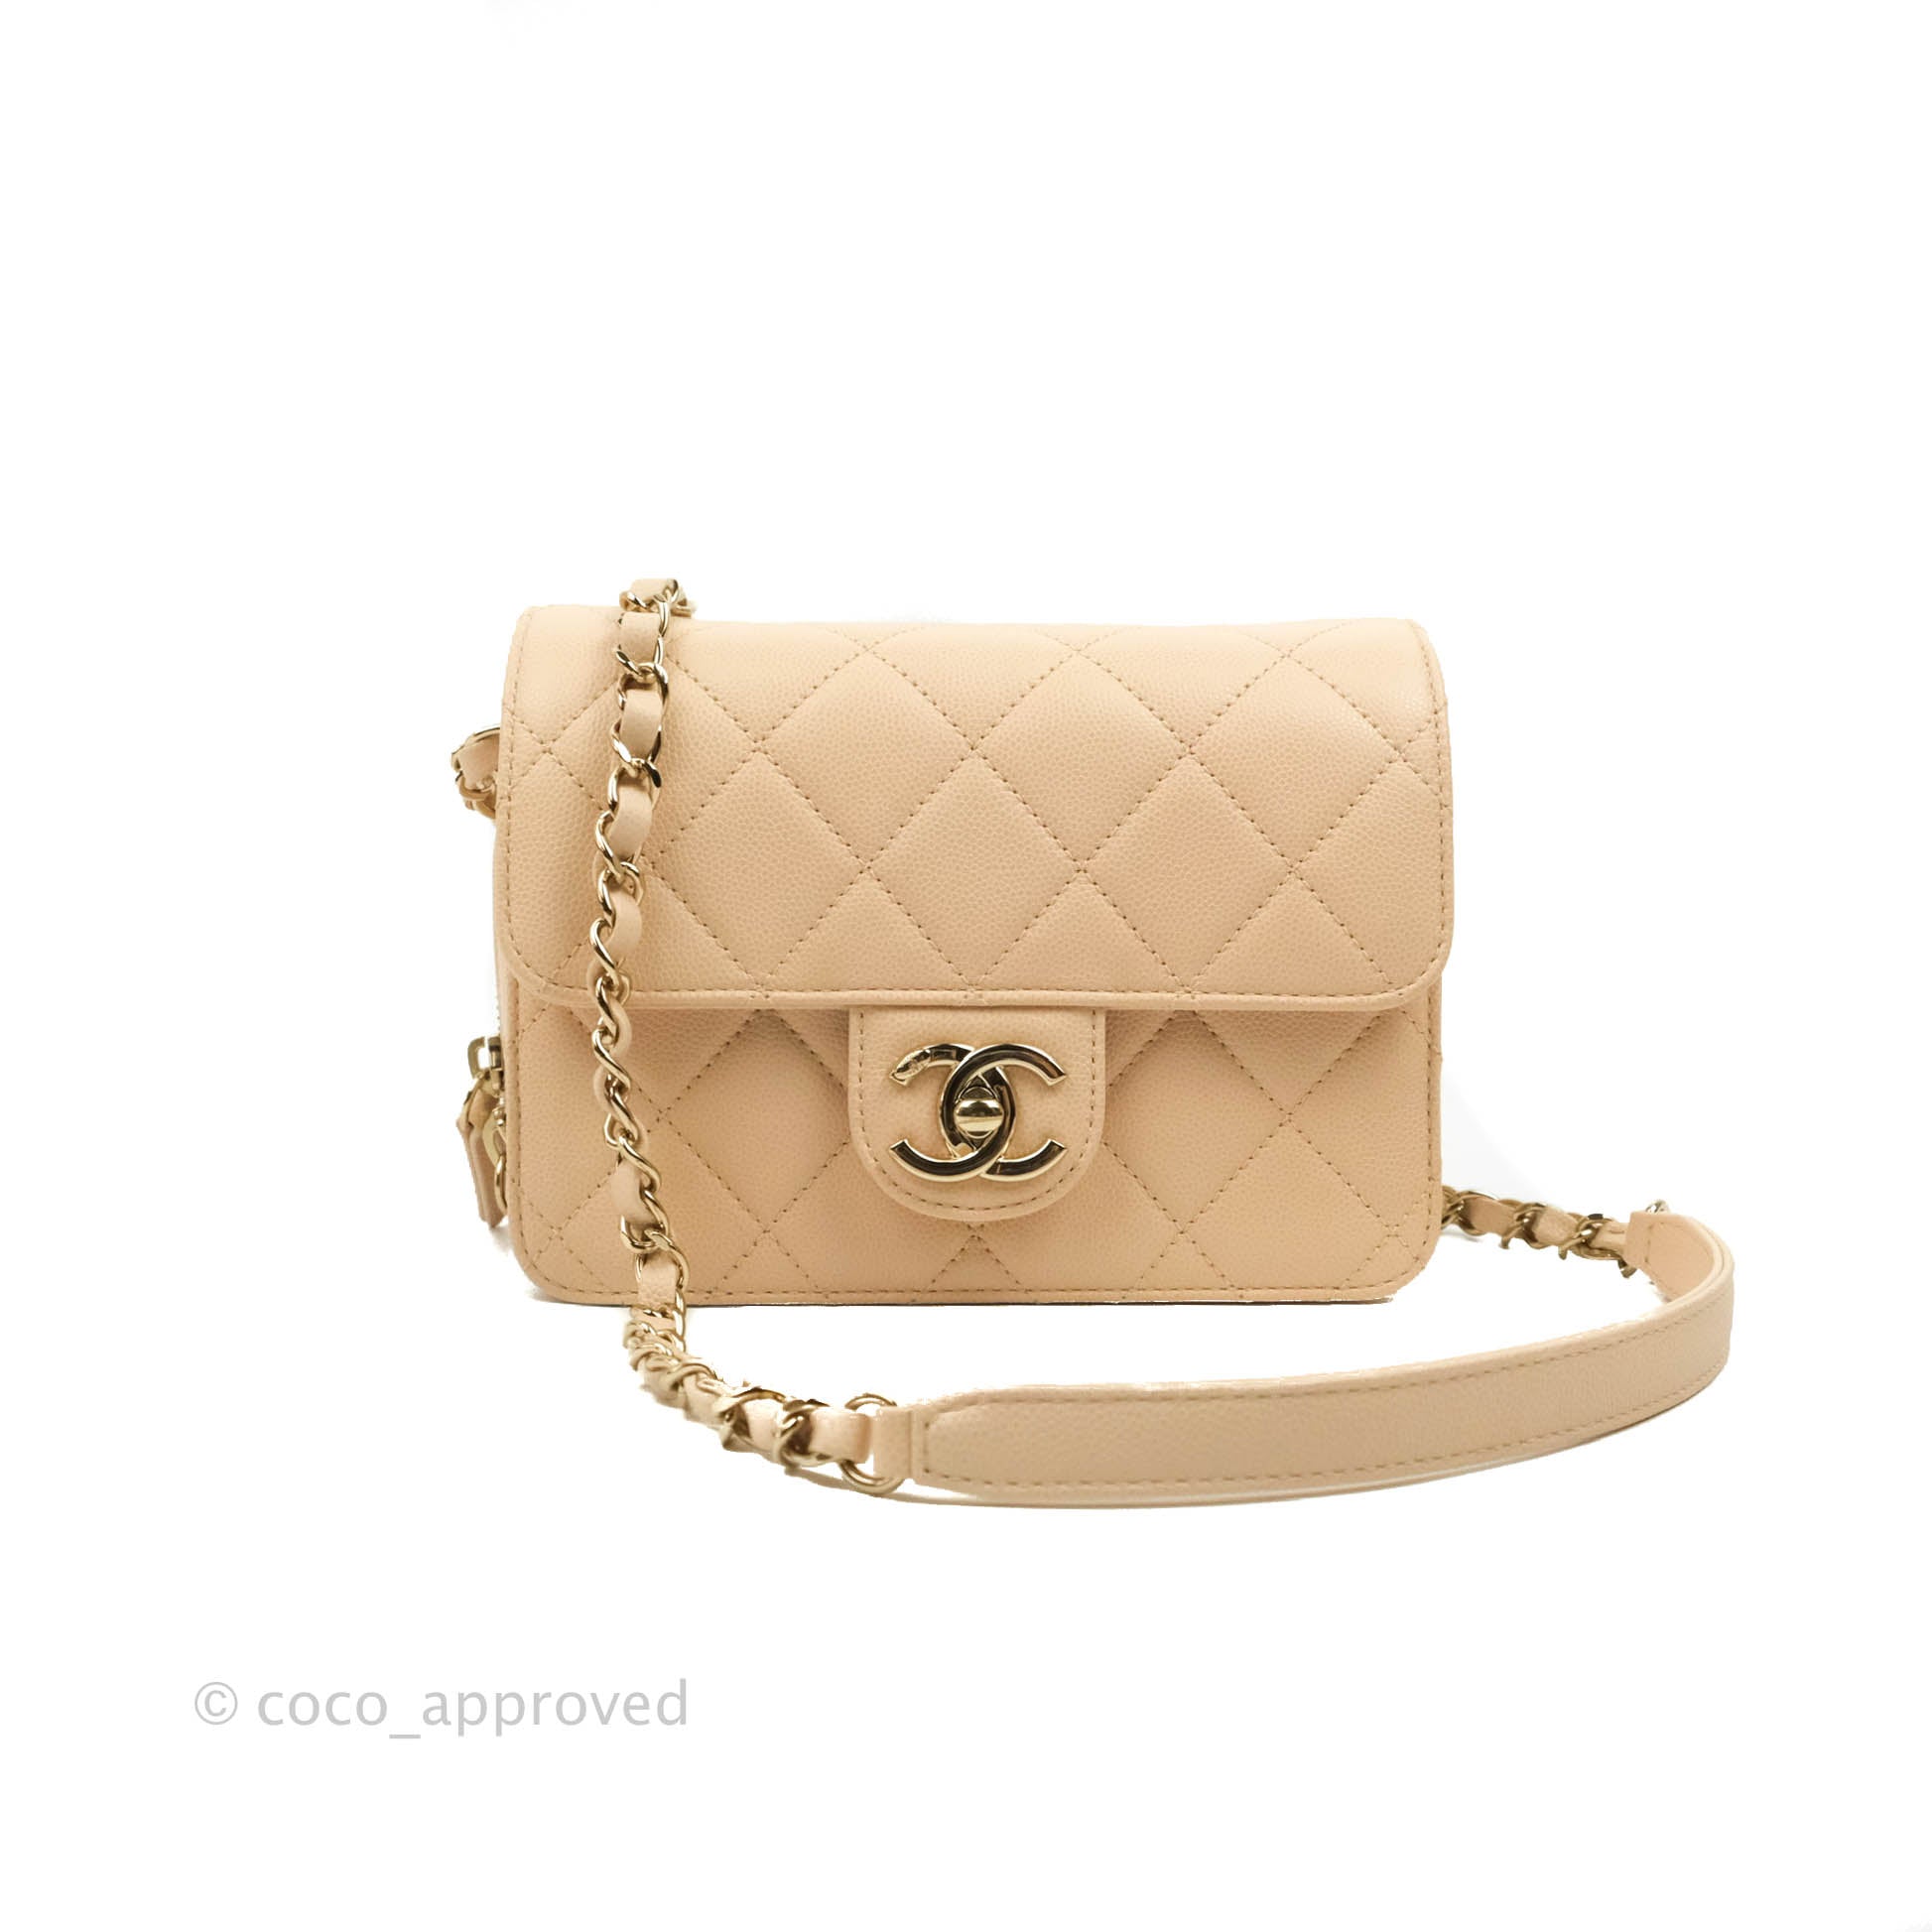 Chanel Classic Medium Double Flap, 22C Beige Caviar Leather, Gold Hardware,  As New in Box